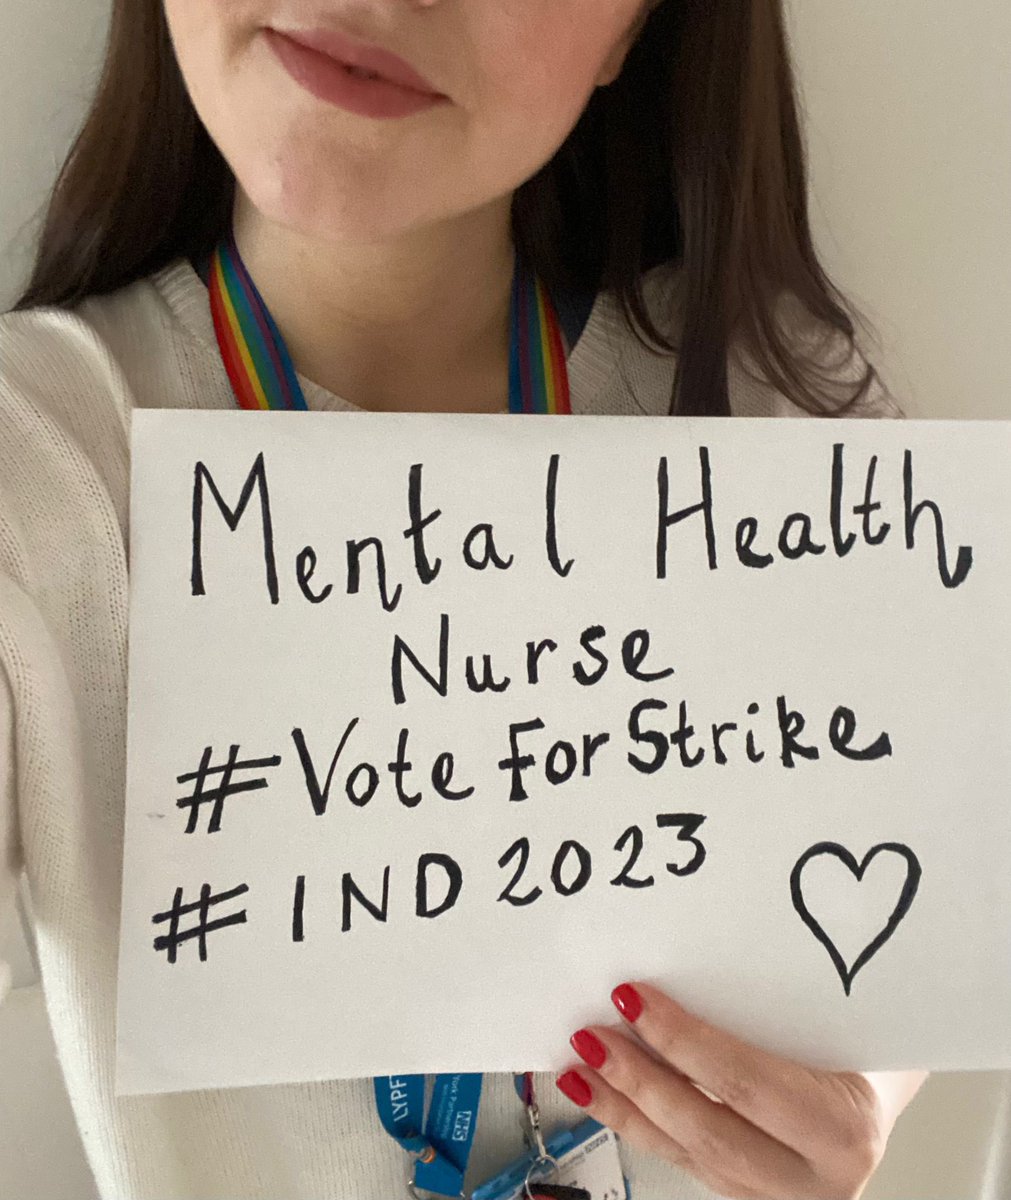 Let’s celebrate our profession, and keep up the fight for its future 👊

RCN Members your ballot opens on 23rd May - #VoteForStrike 

#InternationalNurseDay2023 #IND2023 #MentalHealthNurse #RMN